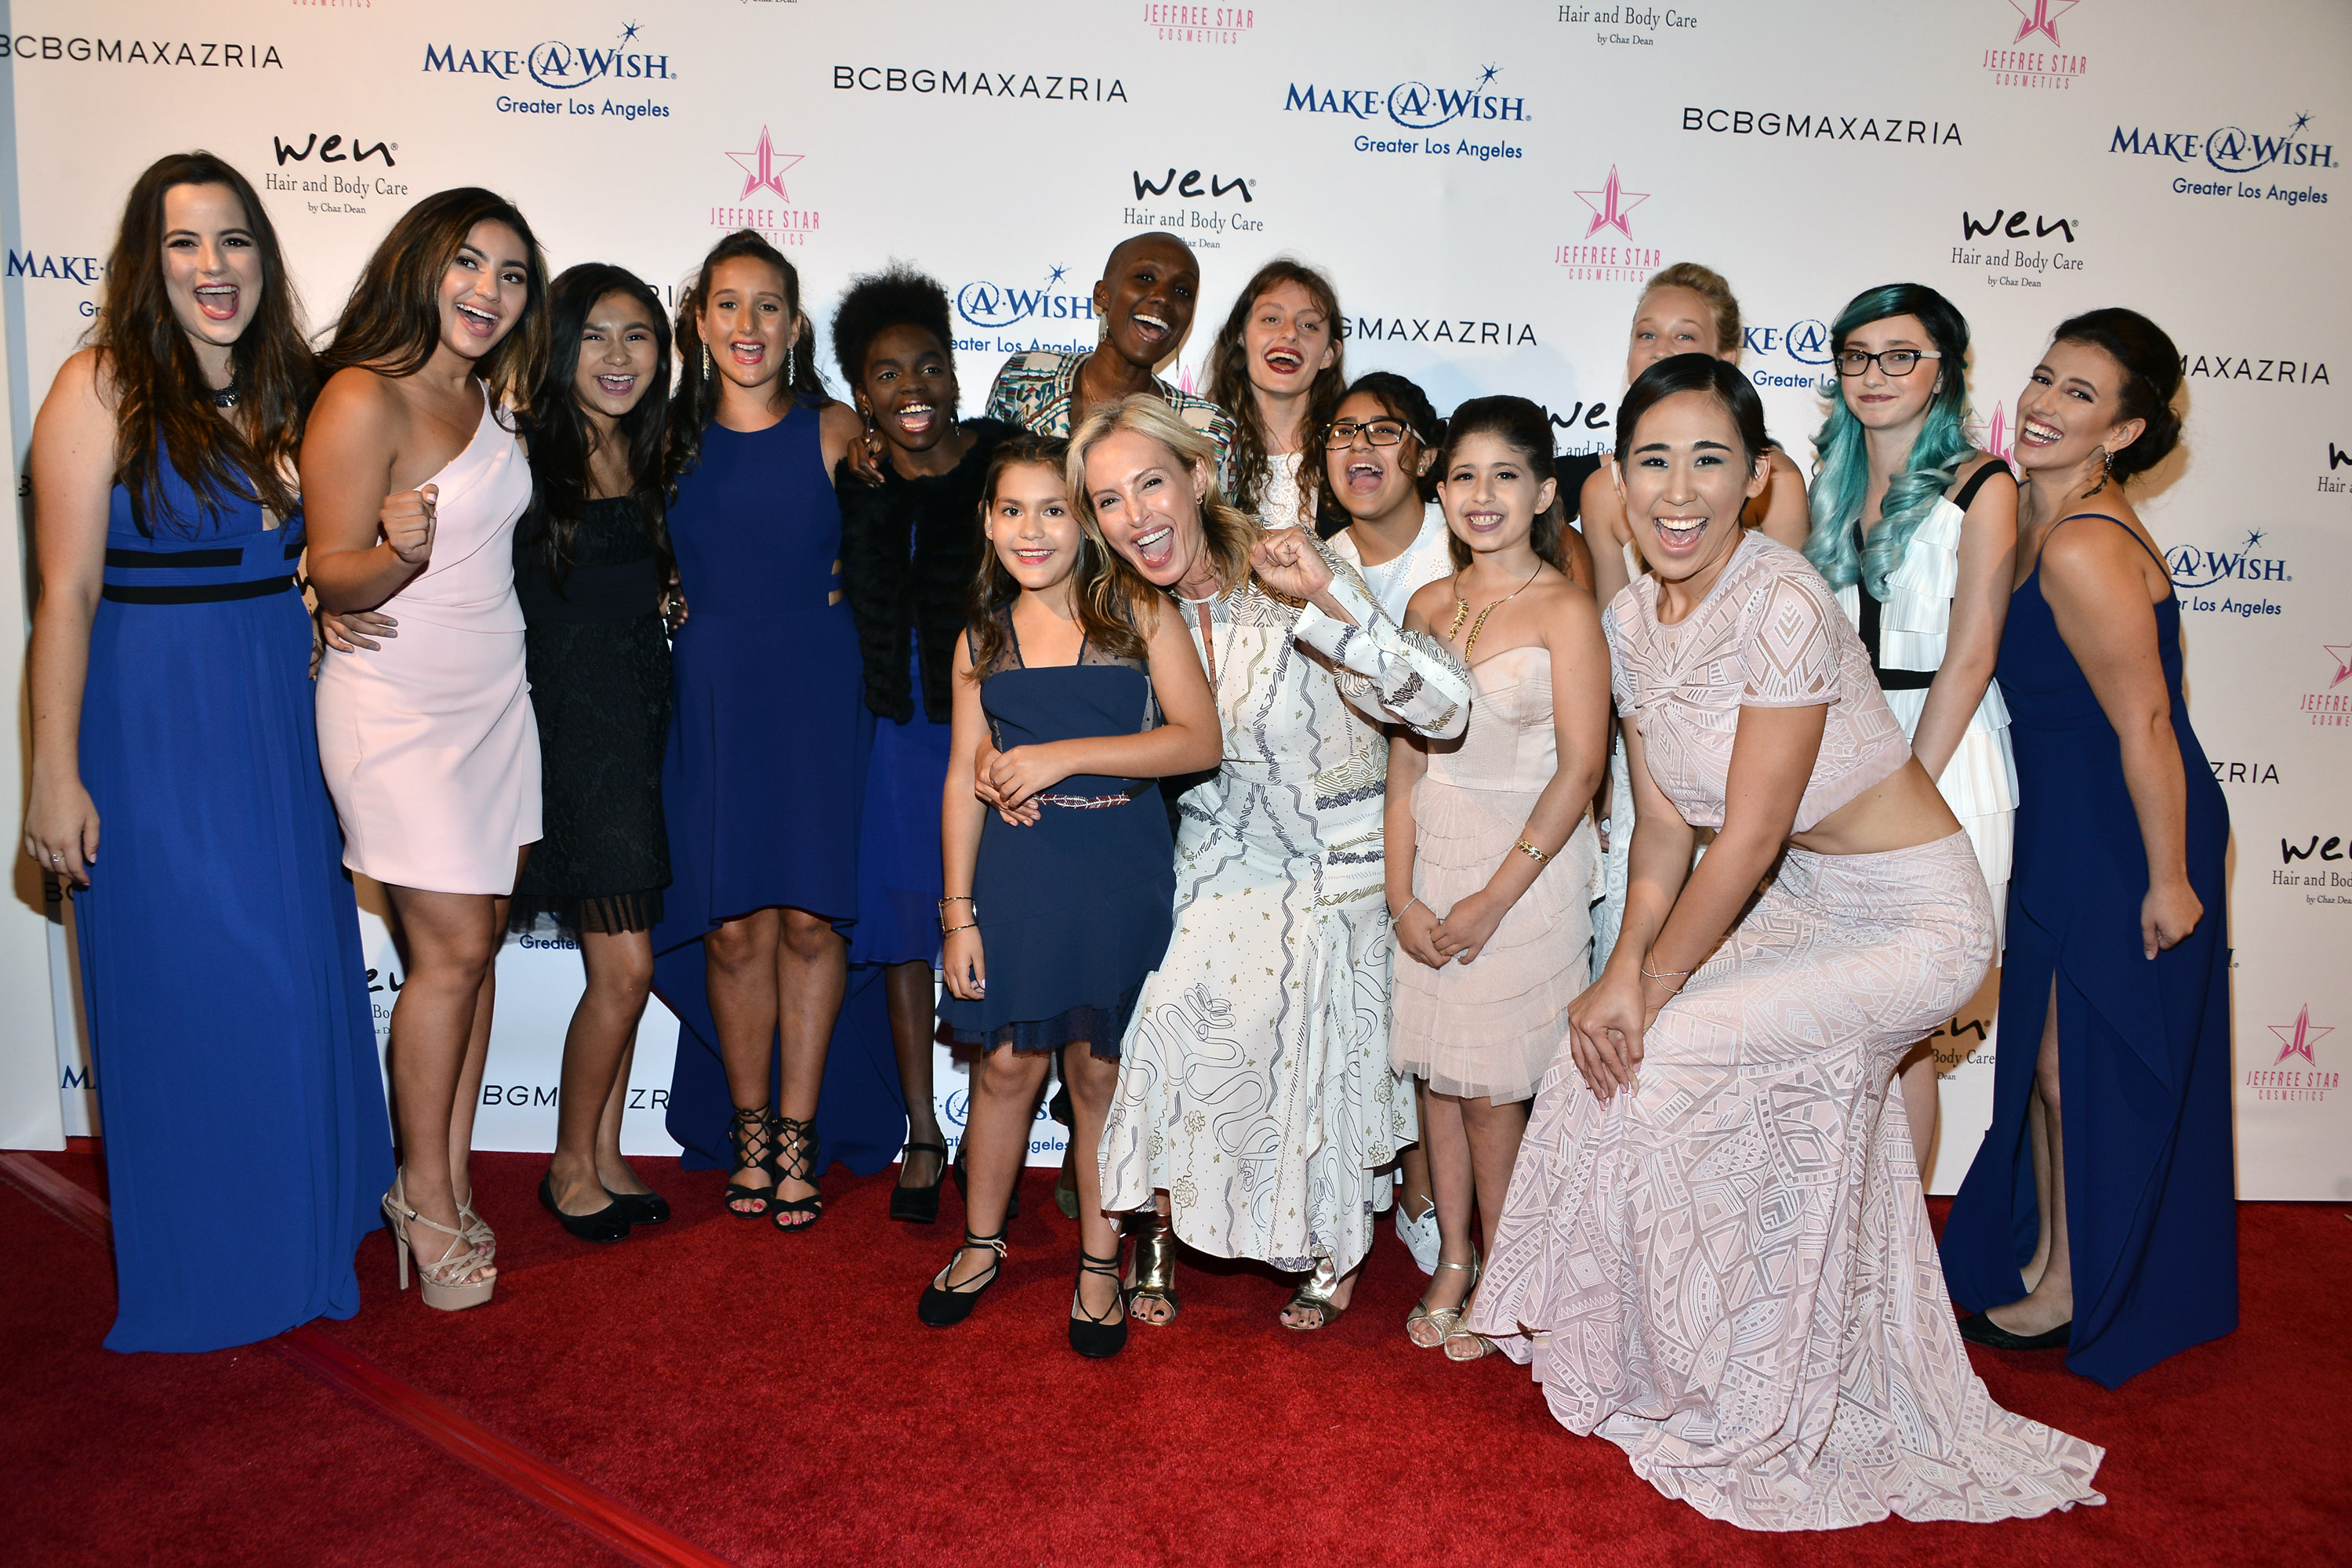 LOS ANGELES, CA - AUGUST 24: Lubov Azria and Make-A-Wish recipients attend the Inaugural Fashion Show Benefiting Make-A-Wish with BCBGMAXAZRIA and Celebrity Host Brad Goreski at The Taglyan Complex on August 24, 2016 in Los Angeles, California. (Photo by Araya Diaz/WireImage)